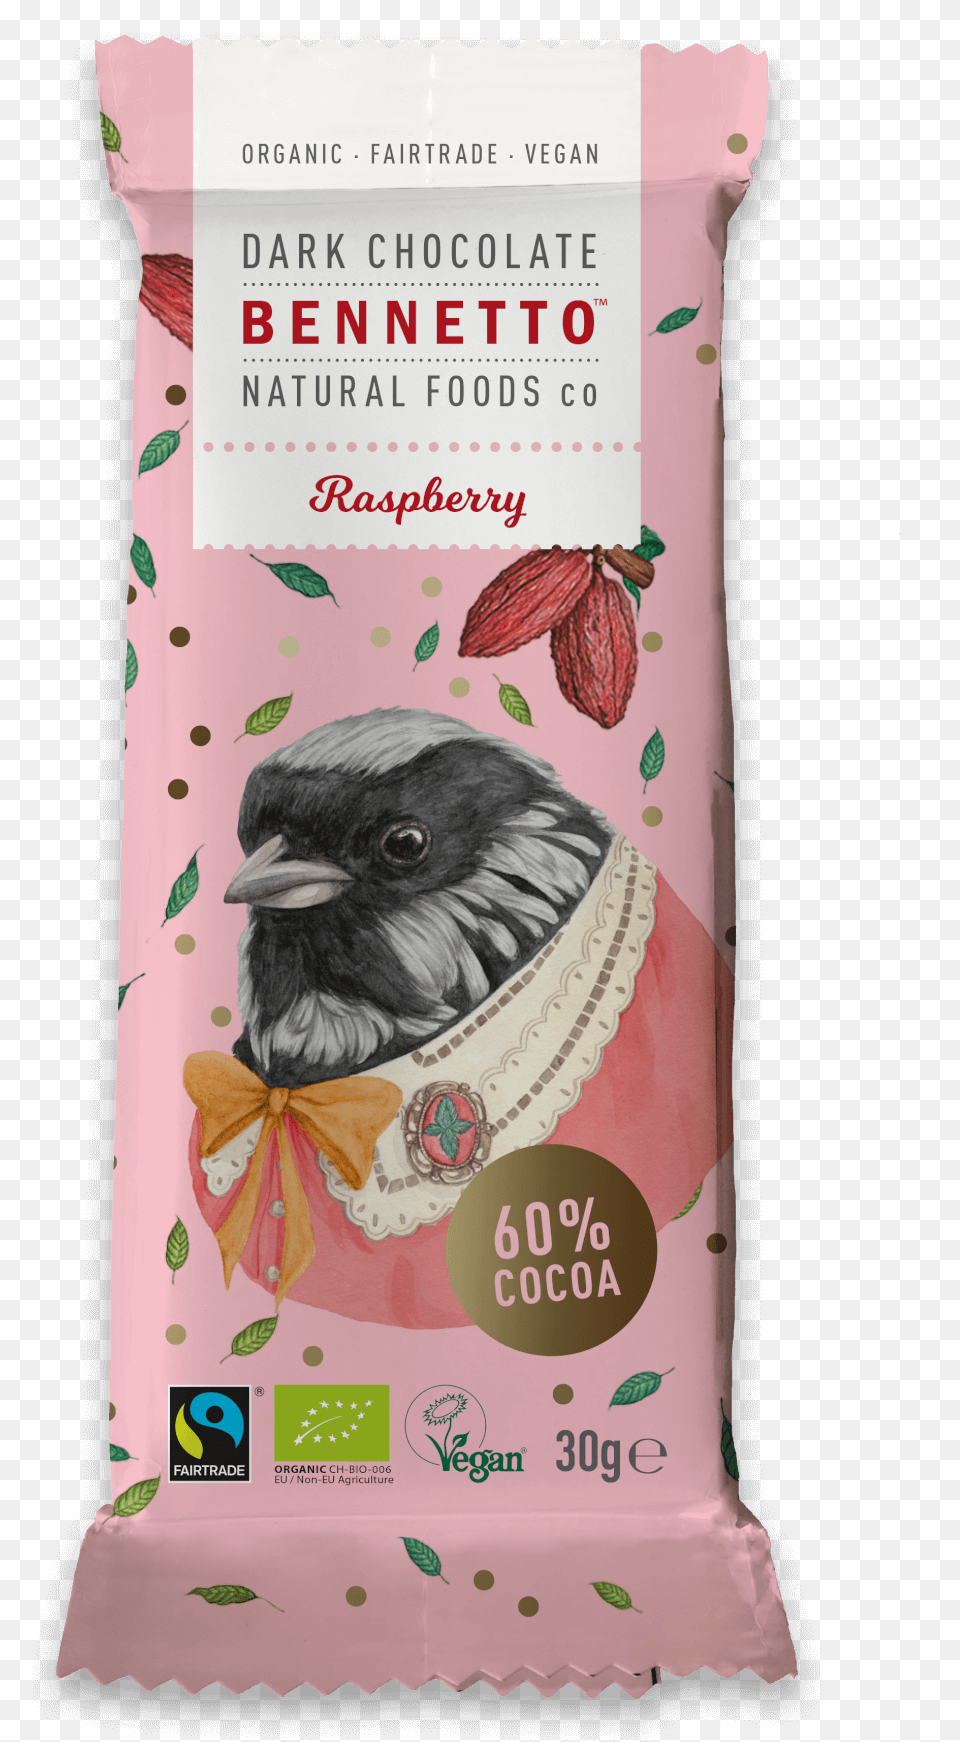 Dark Chocolate Bennetto Chocolate Nz, Animal, Bird, Food, Sweets Free Png Download